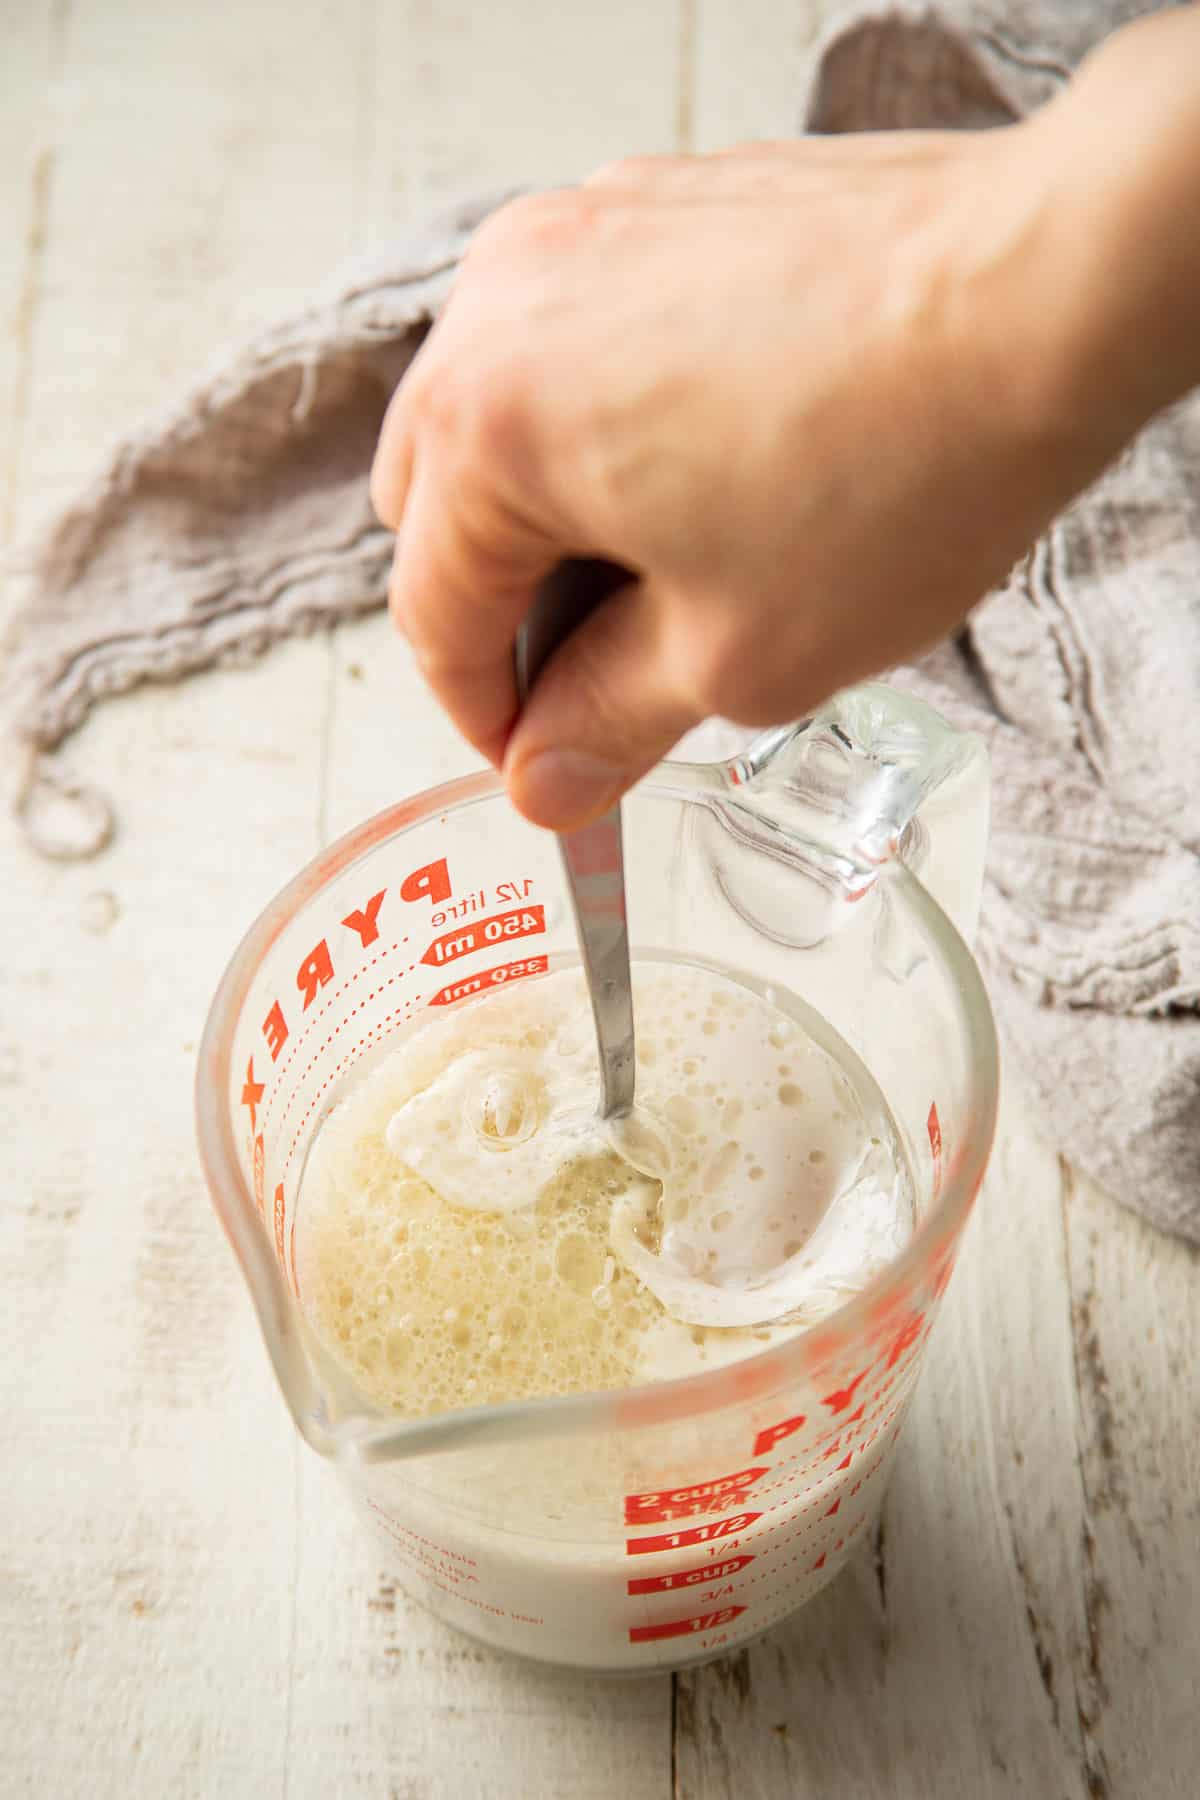 By hand stirring the liquid ingredients for the pancake batter together in a liquid measuring cup.